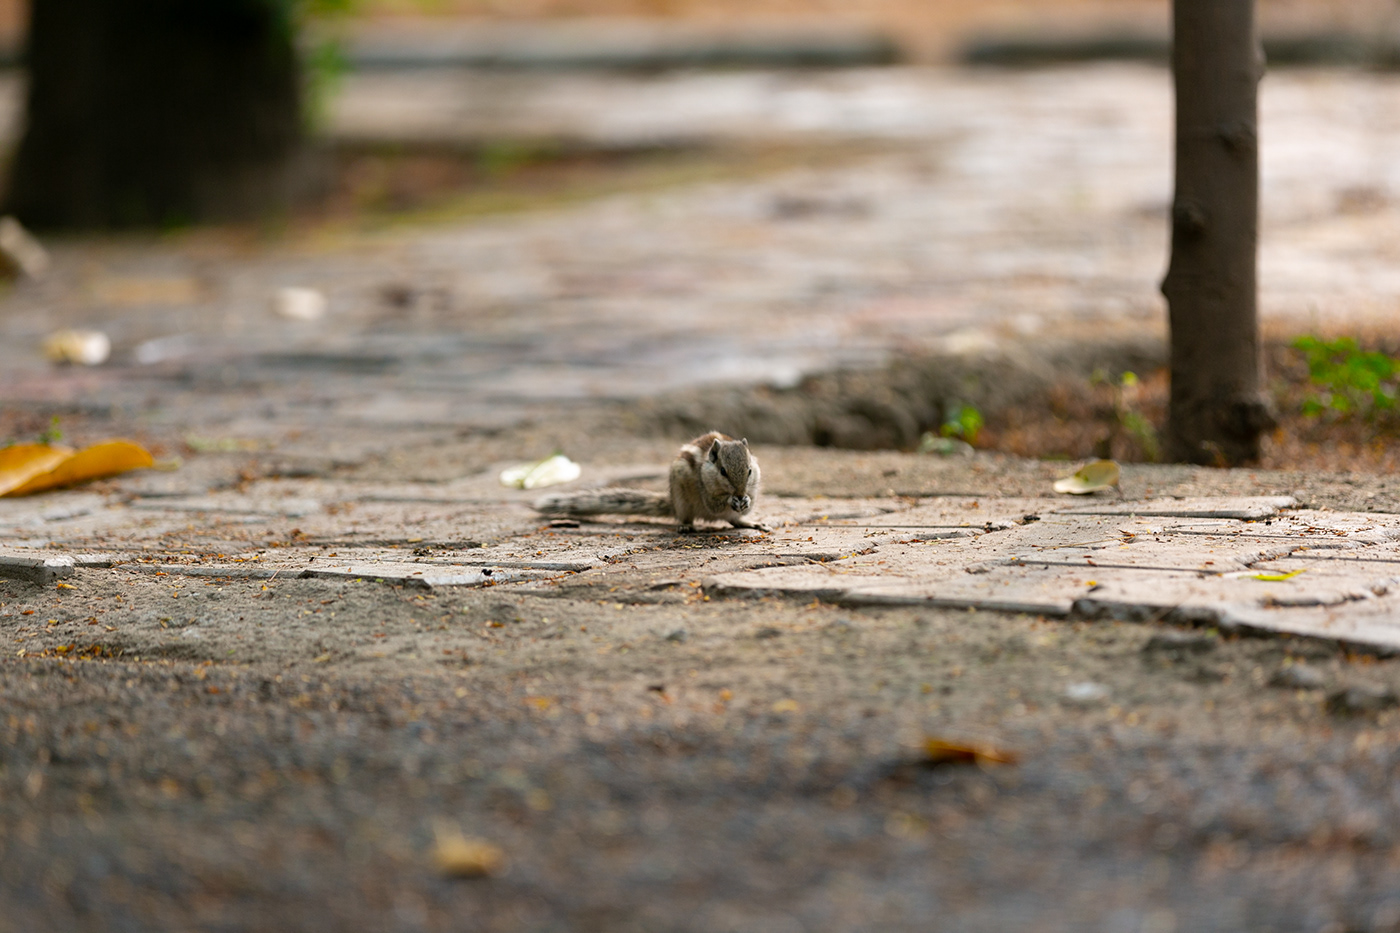 Photography  squirrel nature photography wildlife urbanphotography streetphotography juxtaposition animals cute